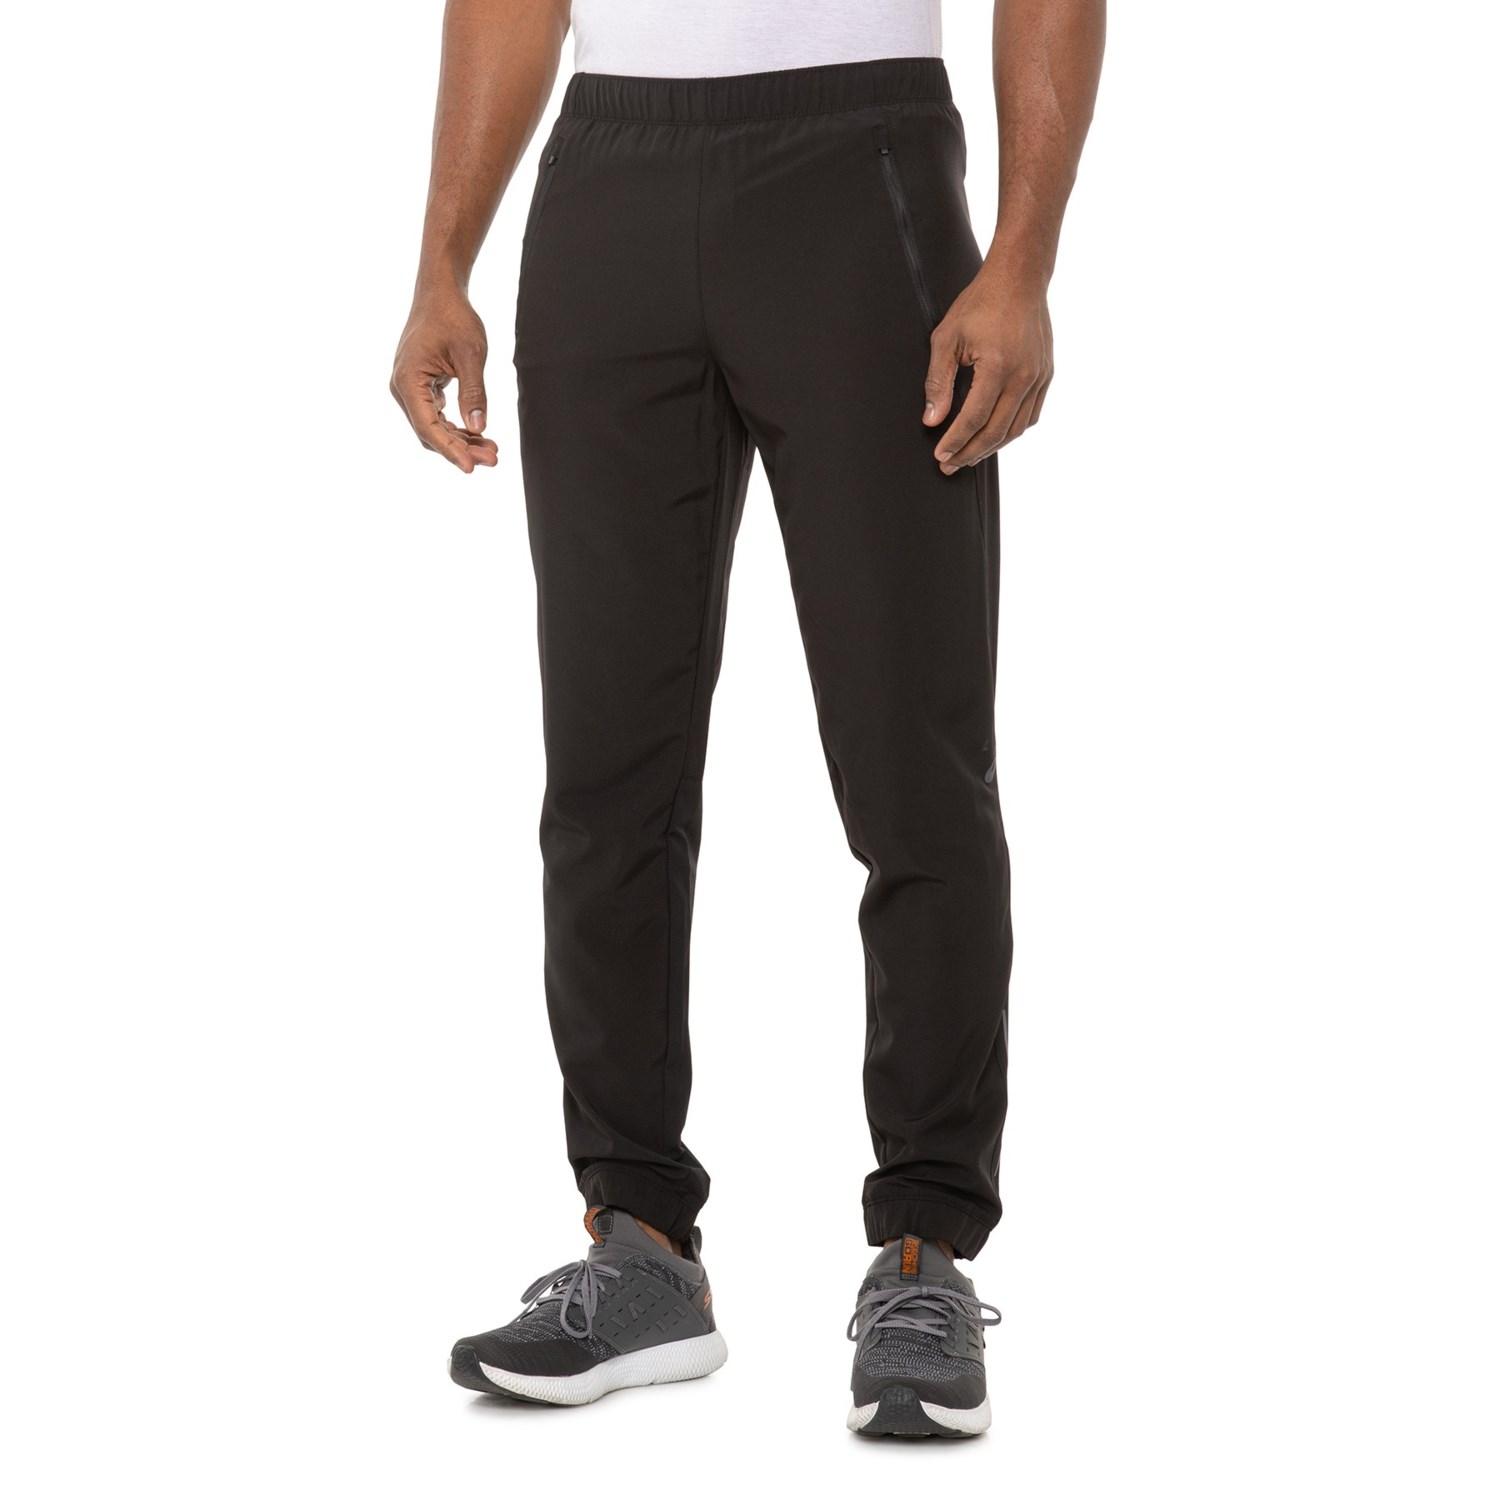 ASICS Stretch-Woven Joggers (For Men) - Save 70%